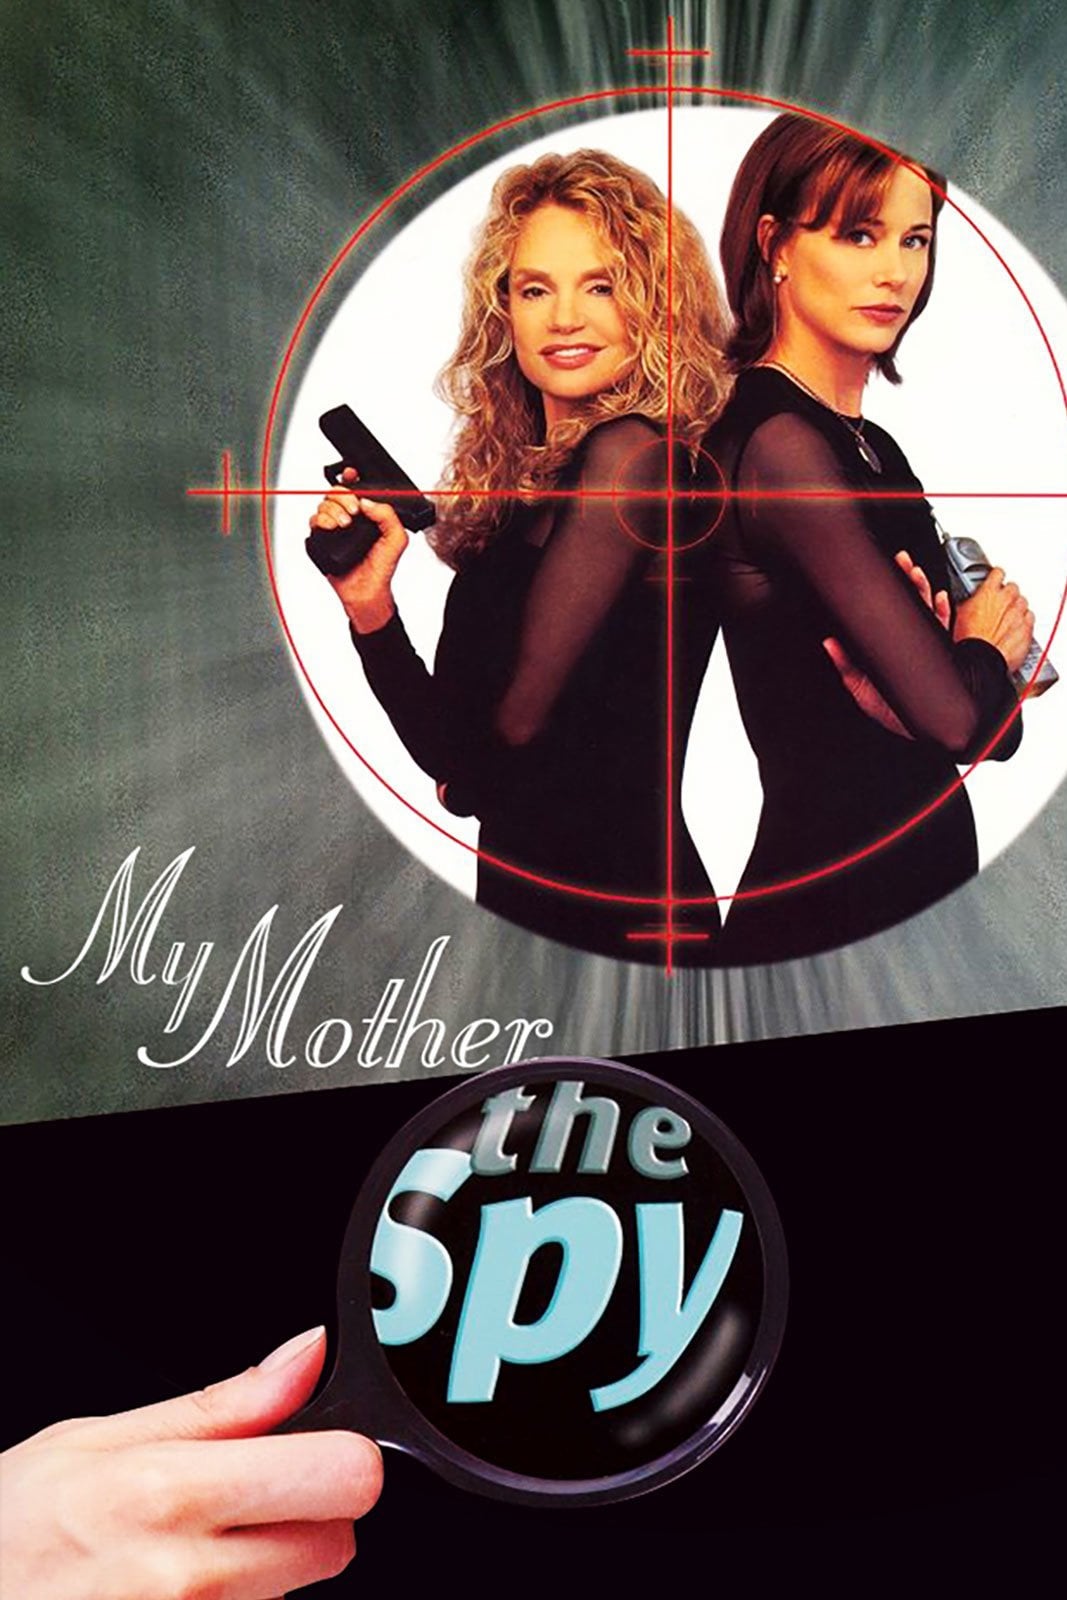 My Mother, the Spy (2000)